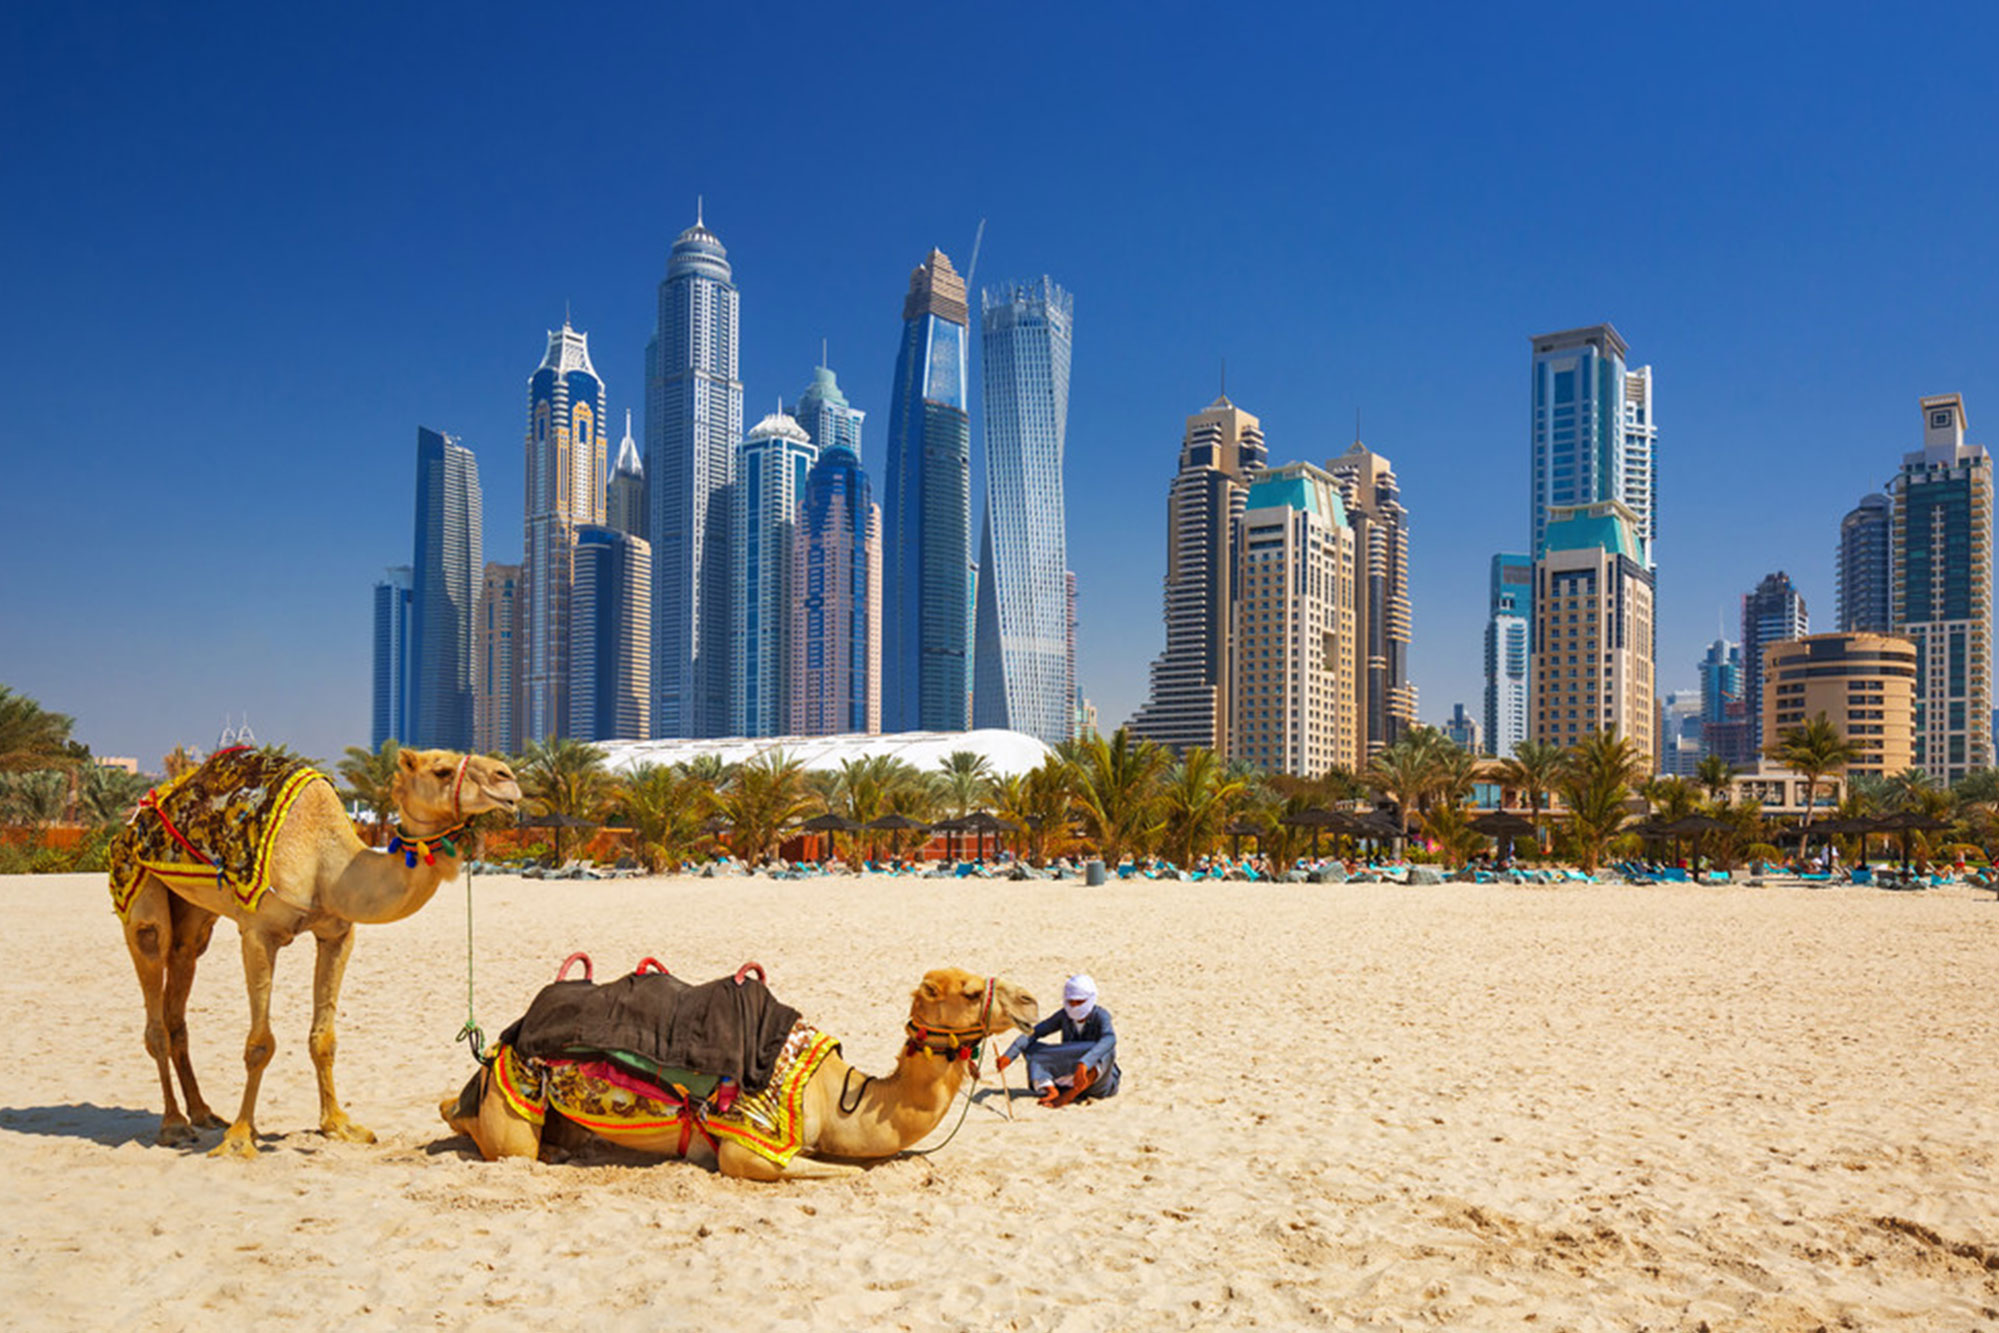 Dubai tourism is back on track as the first 11 months of 2021 record 6 million visits!